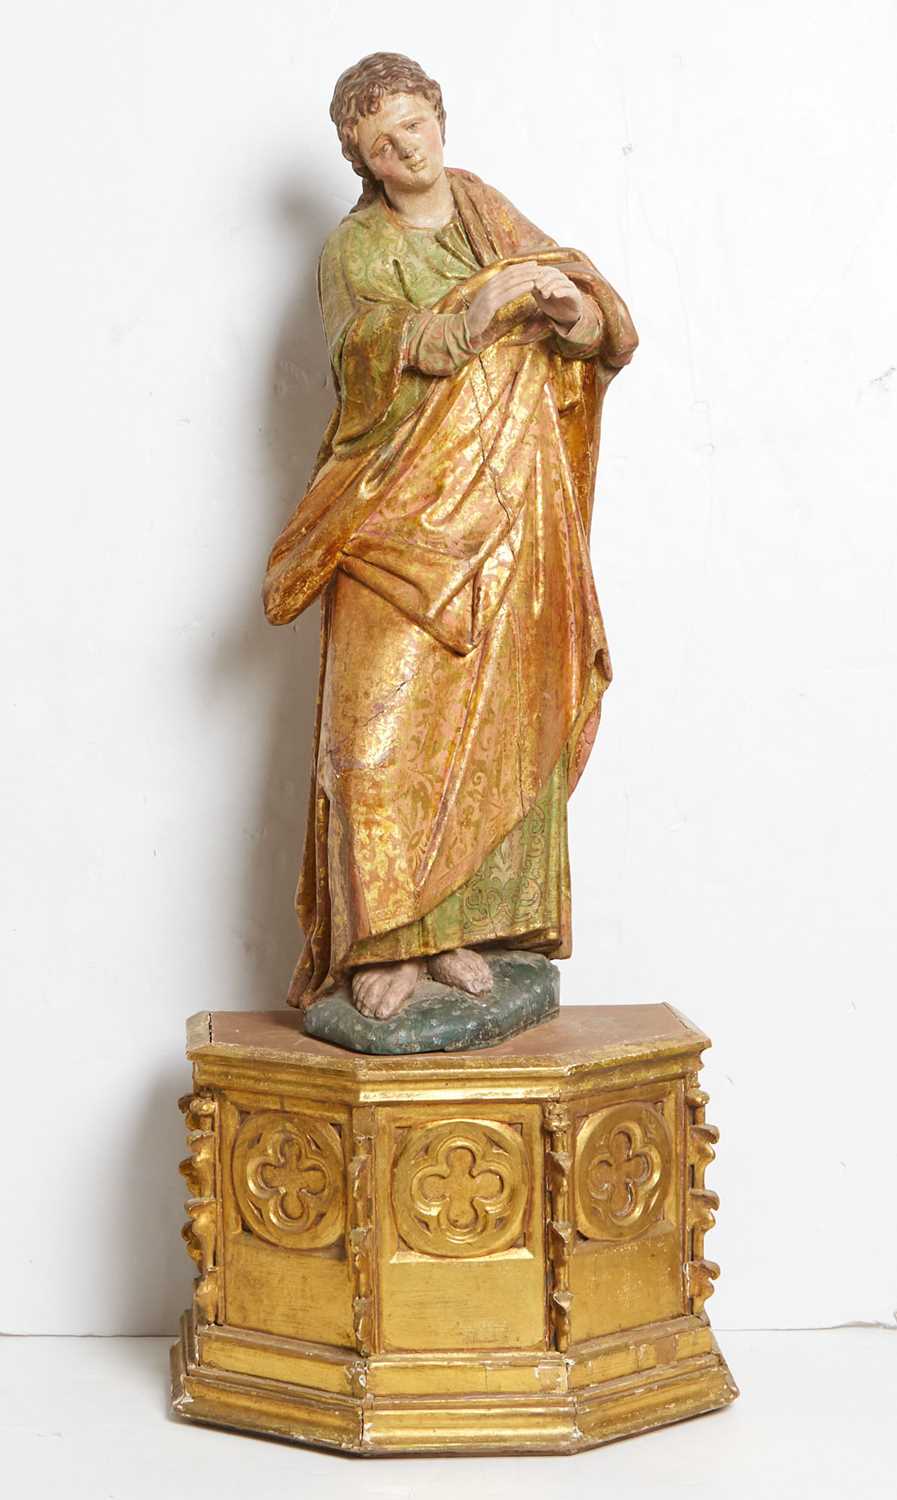 Lot 420 - Continental Polychrome Painted and Parcel-Gilt Wood Figure of a Male Saint